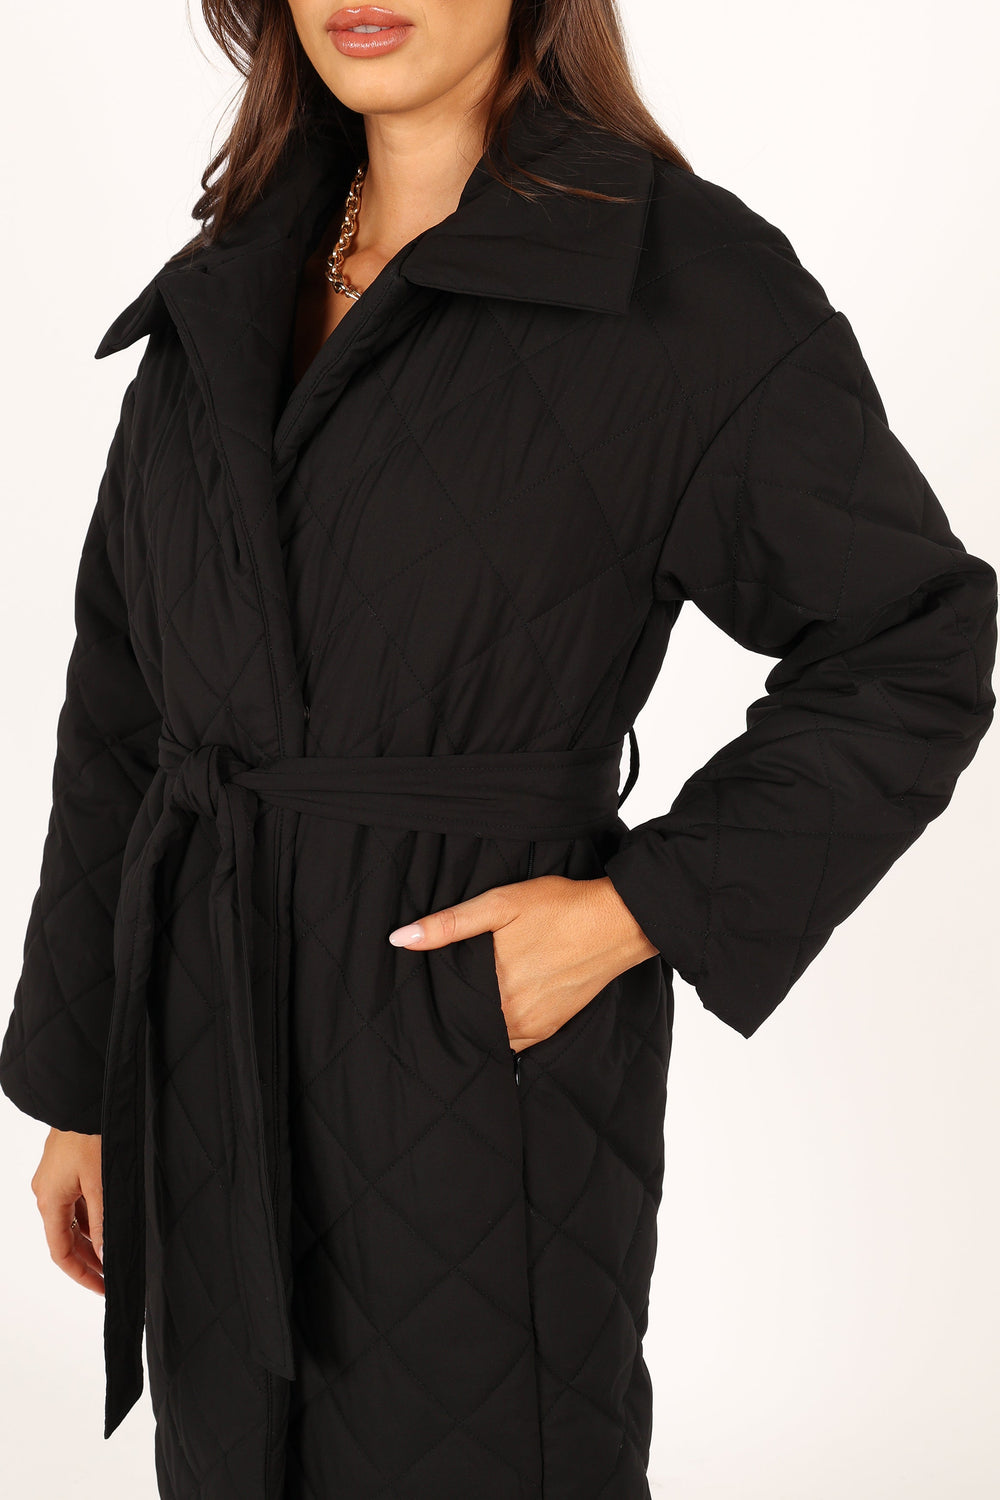 Petal and Pup USA OUTERWEAR Kallie Quilted Tie Front Coat - Black